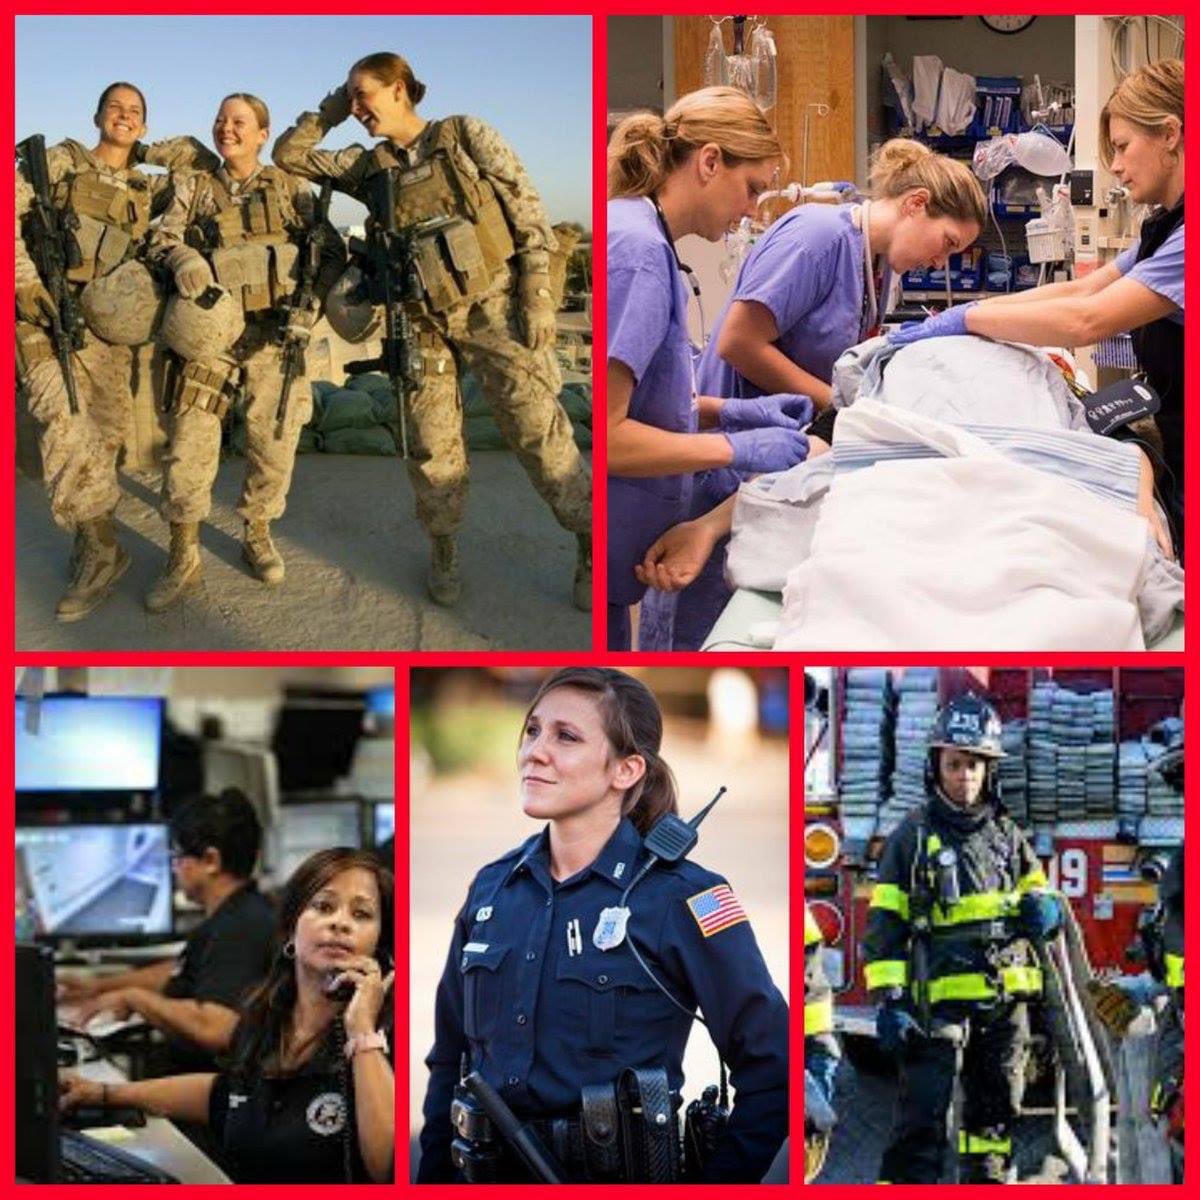 Happy Mother’s Day 🌹 
Especially to all the Mothers on duty today, have a good shift, be safe ✌️
#Police #Firefighters #nurses #911Dispatchers #military